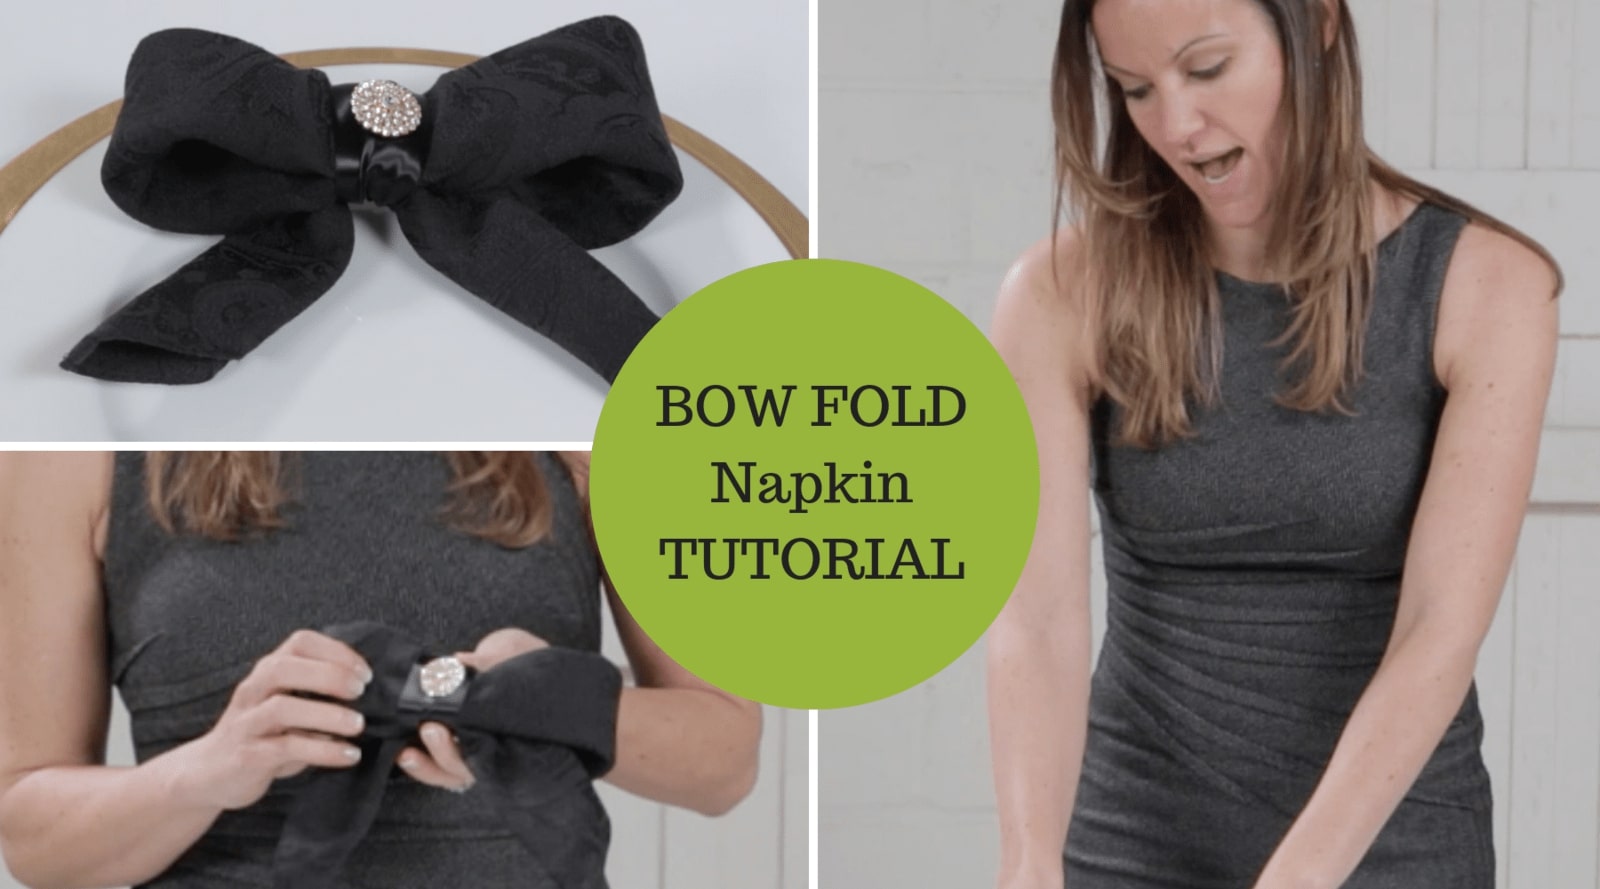 Napkin Folding Tutorial Bow Fold Technique with Added Bling